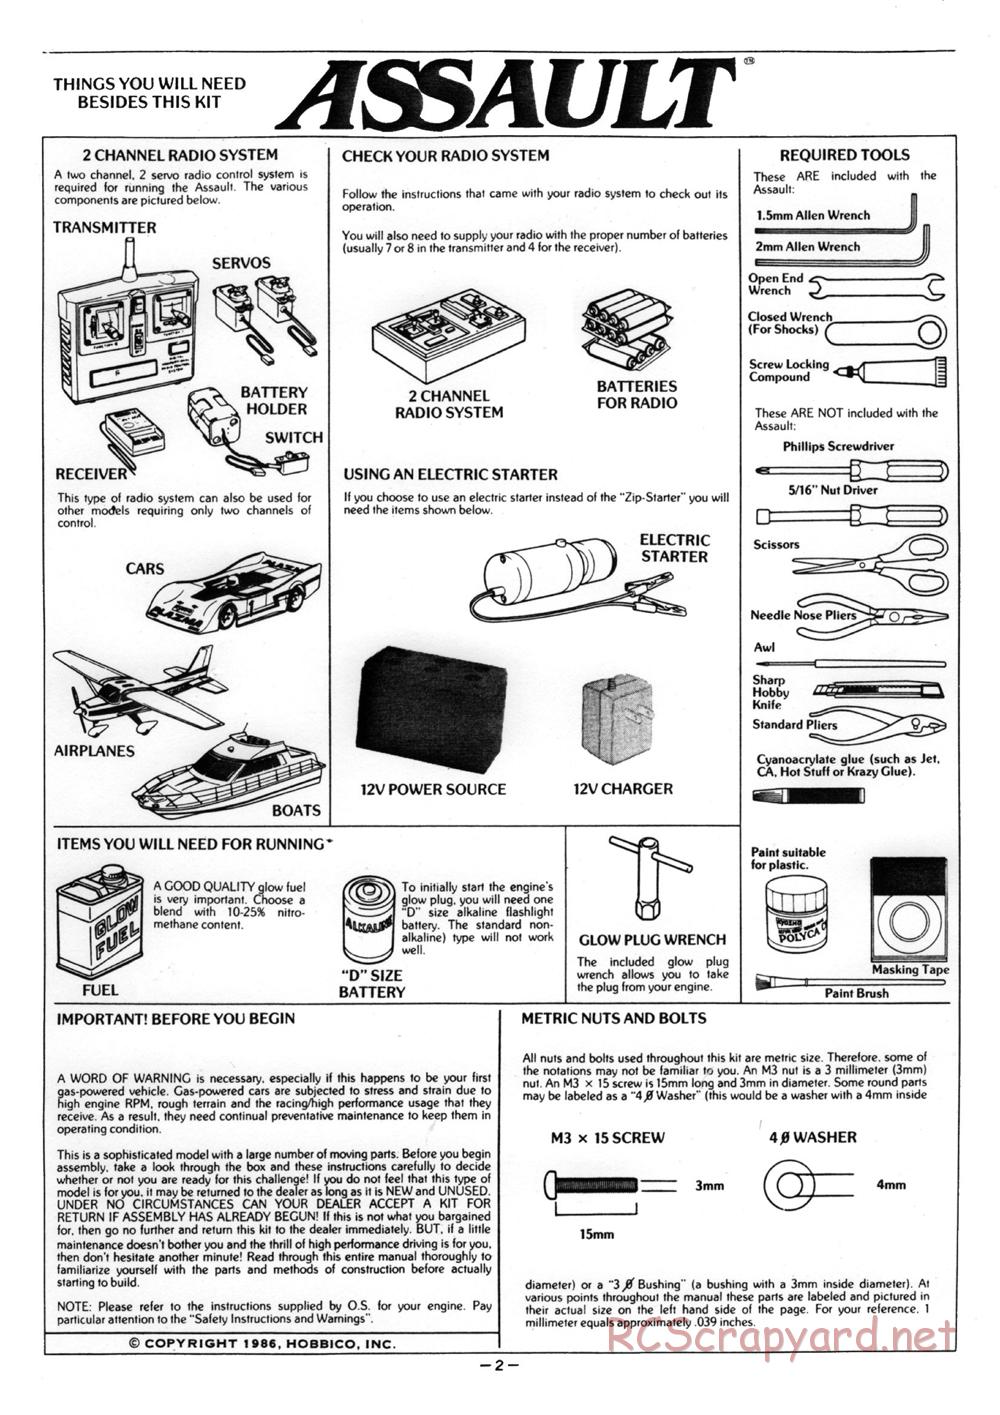 Kyosho - Assault - Manual - Page 2